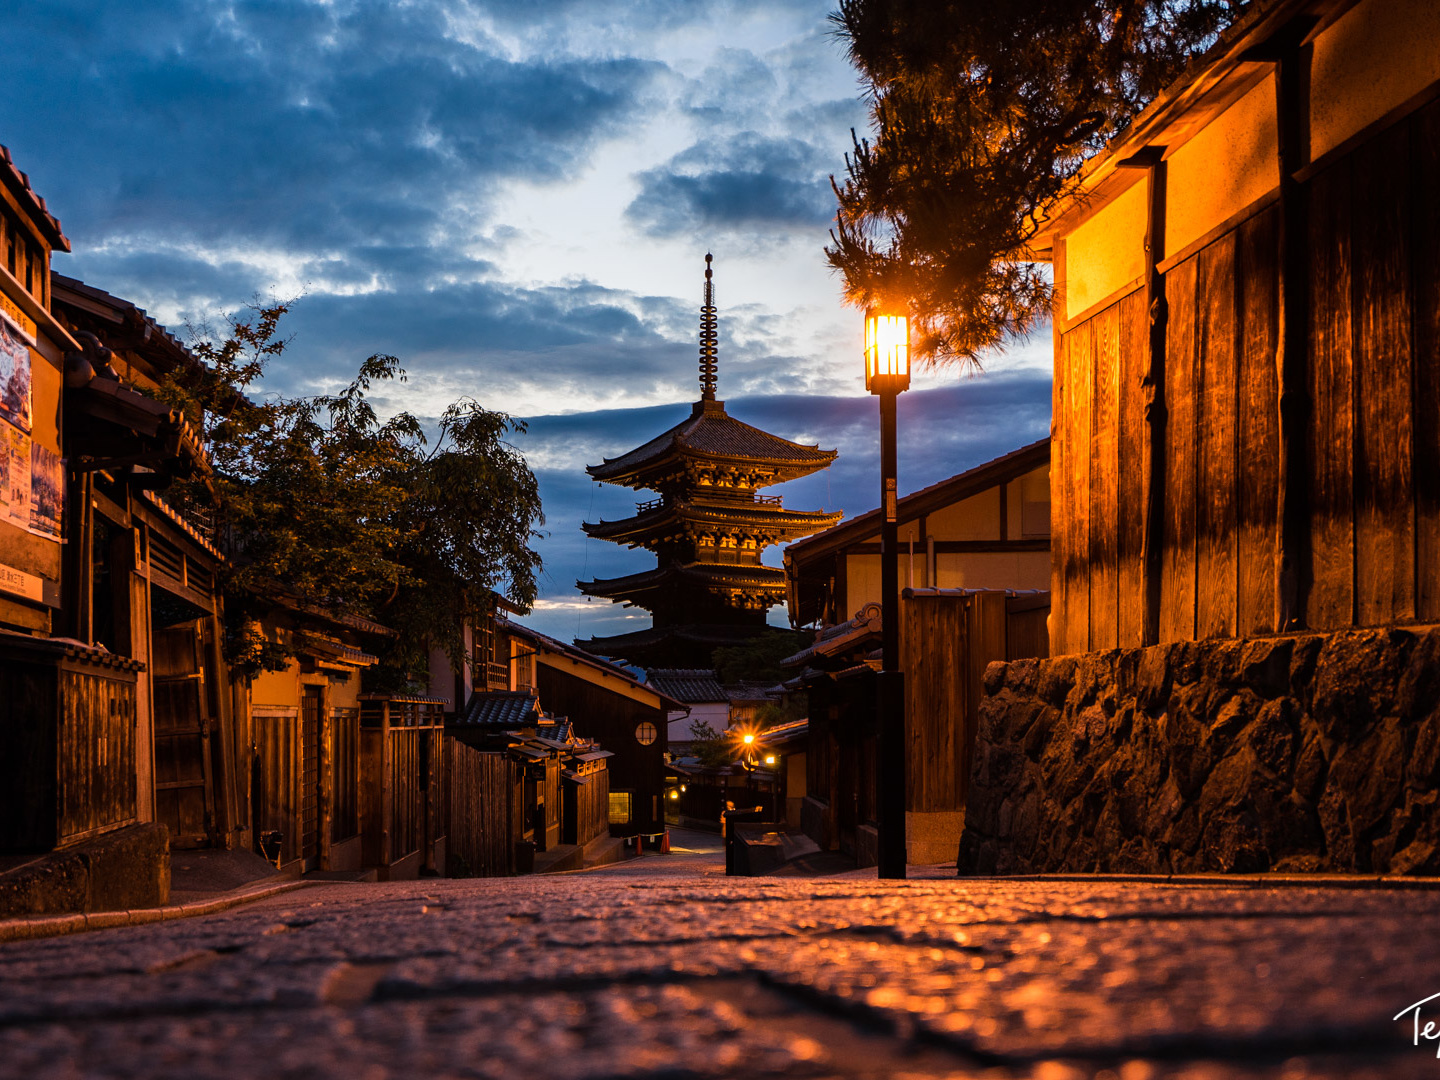 My Favorite Places To Visit in Kyoto During Summer